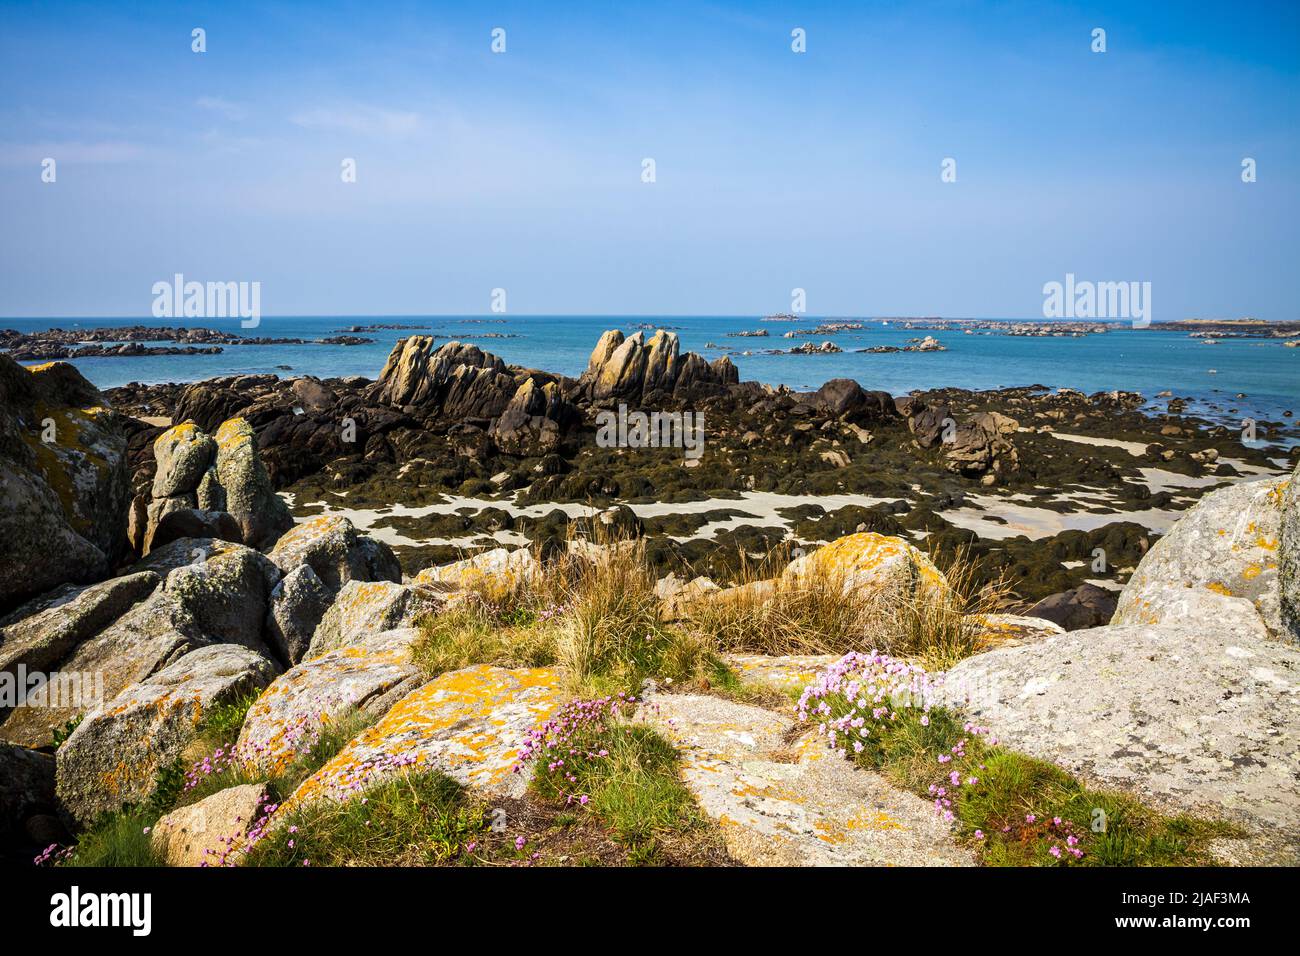 Chausey island coast and cliffs landscape in Brittany, France Stock Photo